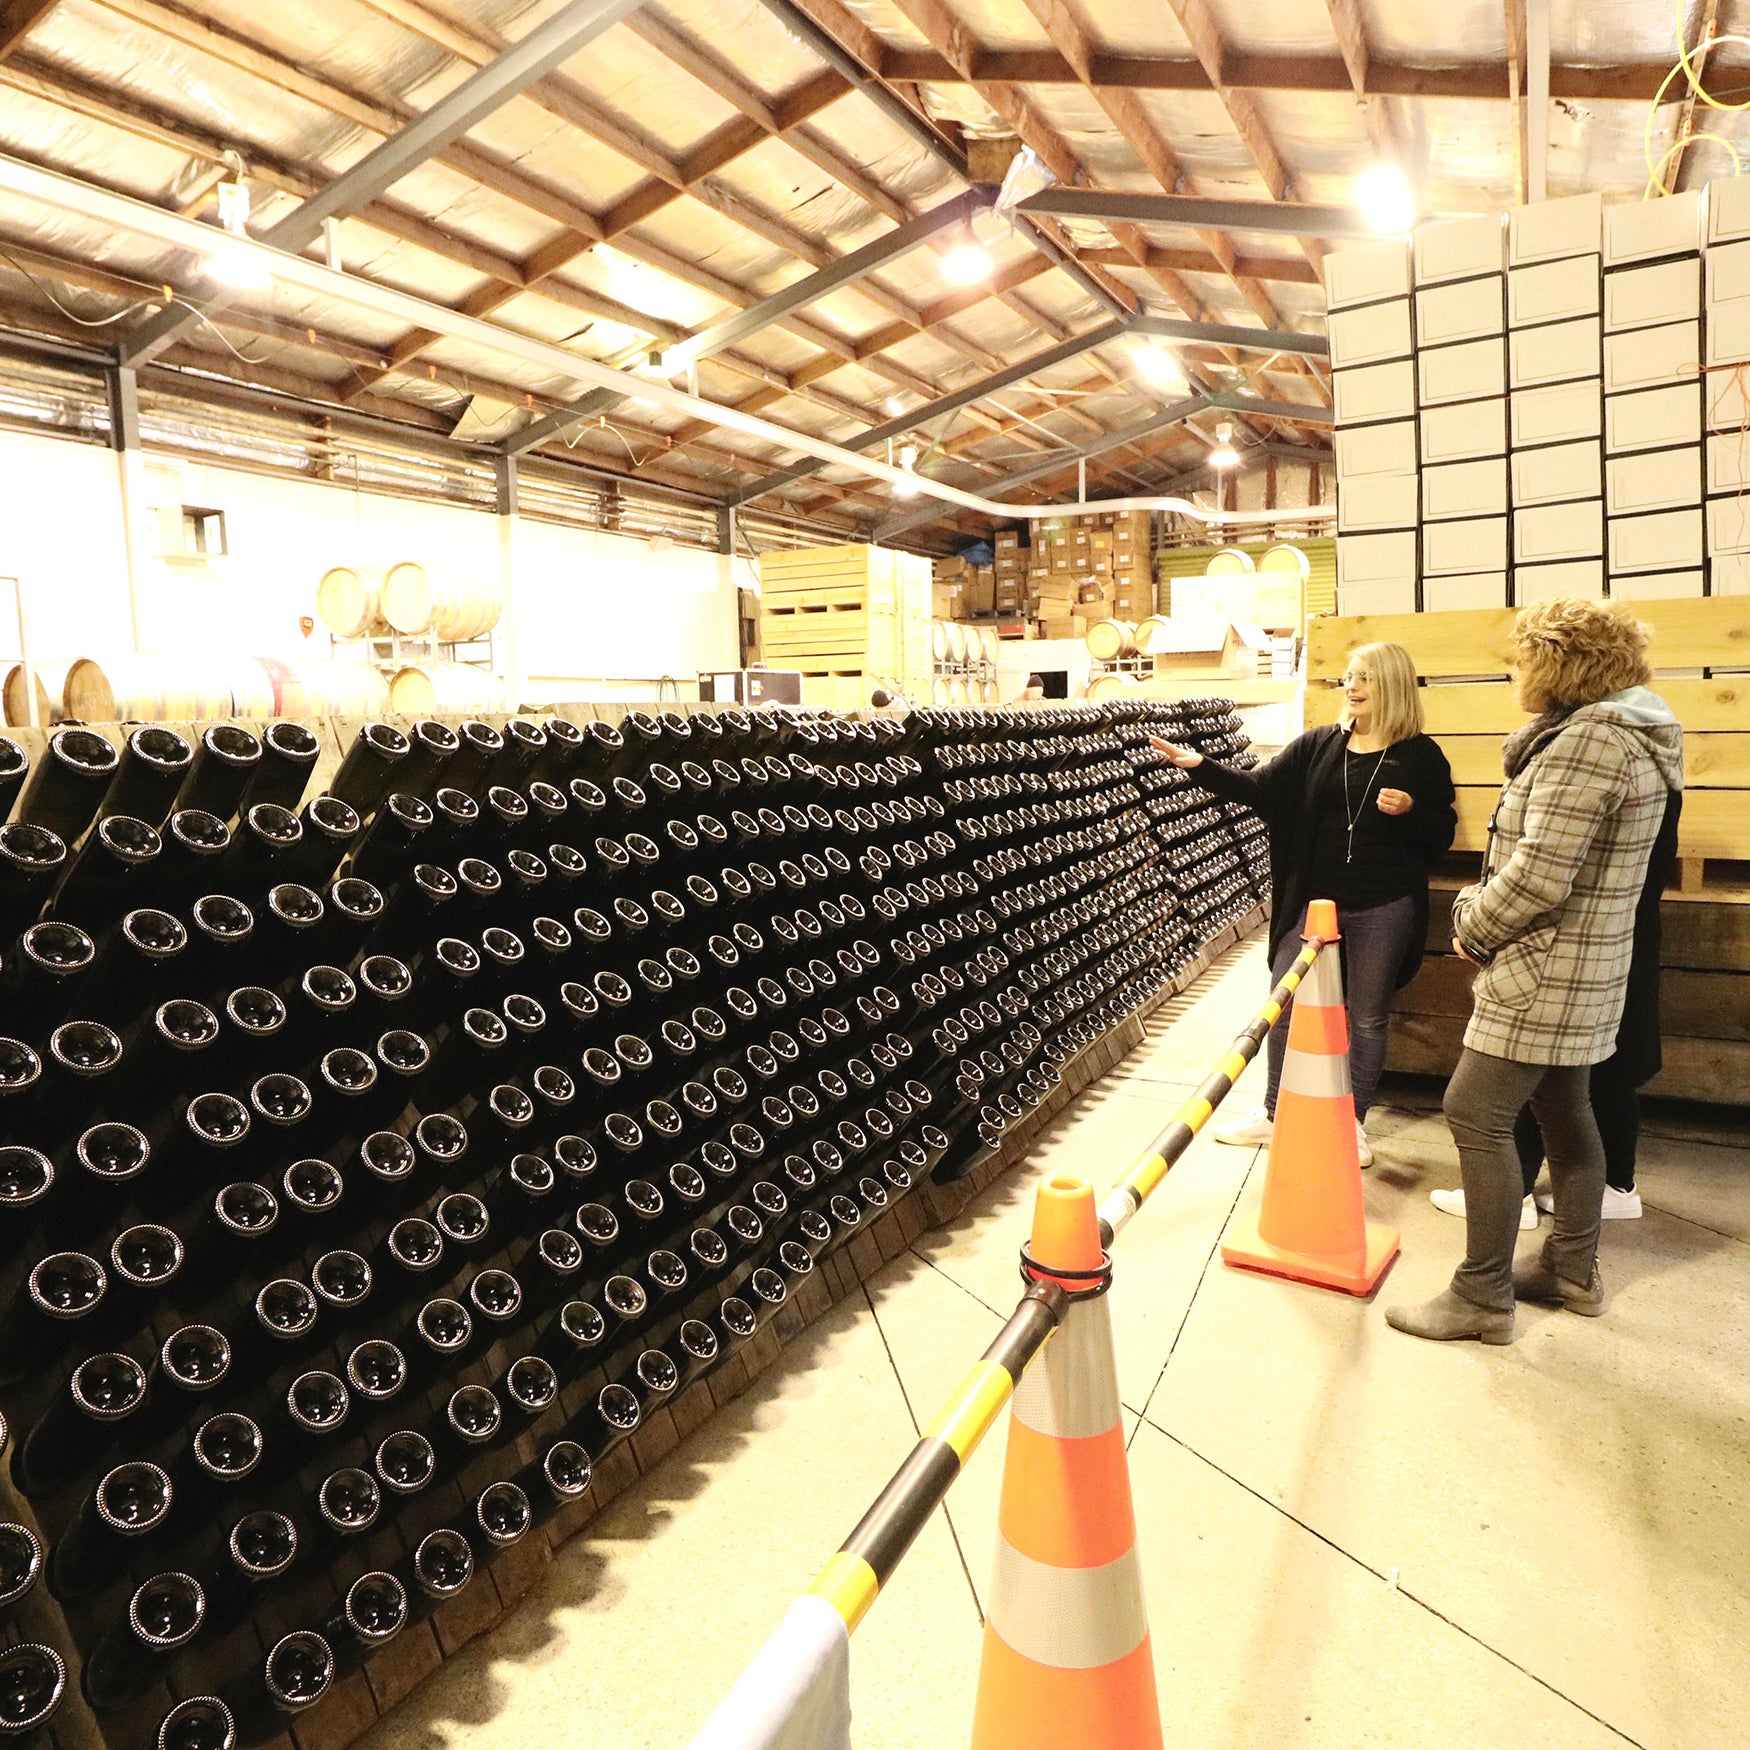 Our Methode Traditionnelle riddling hall at our Central Otago Winery, hand crafted sparkling wine of New Zealand